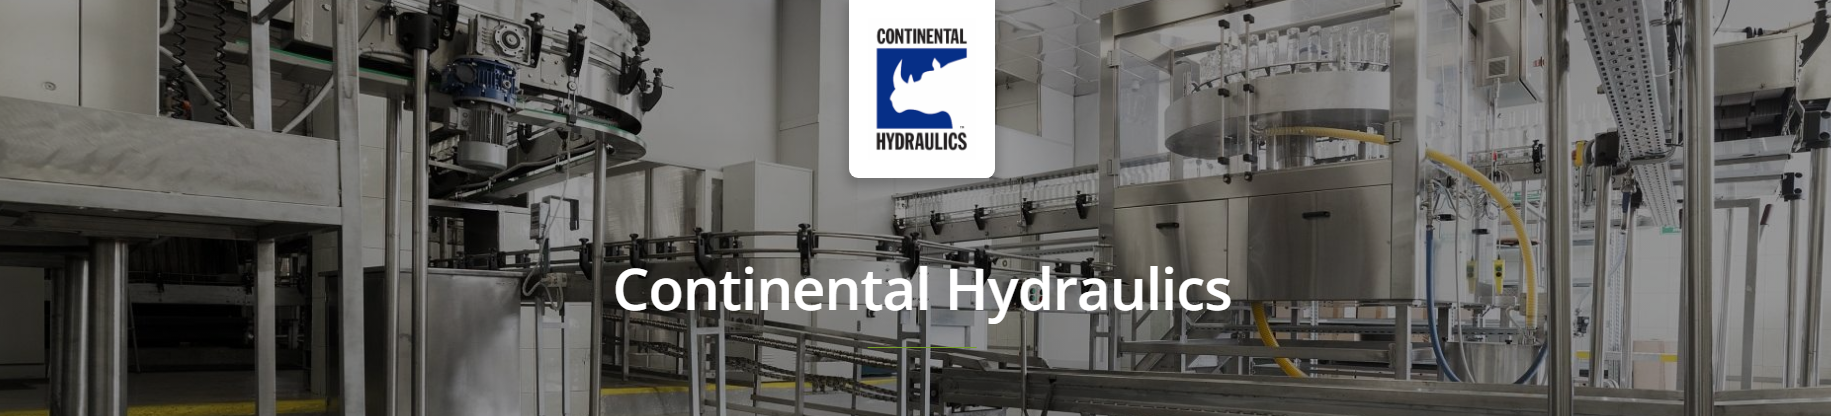 Continental Hydraulics Subplate and In-Line Valves